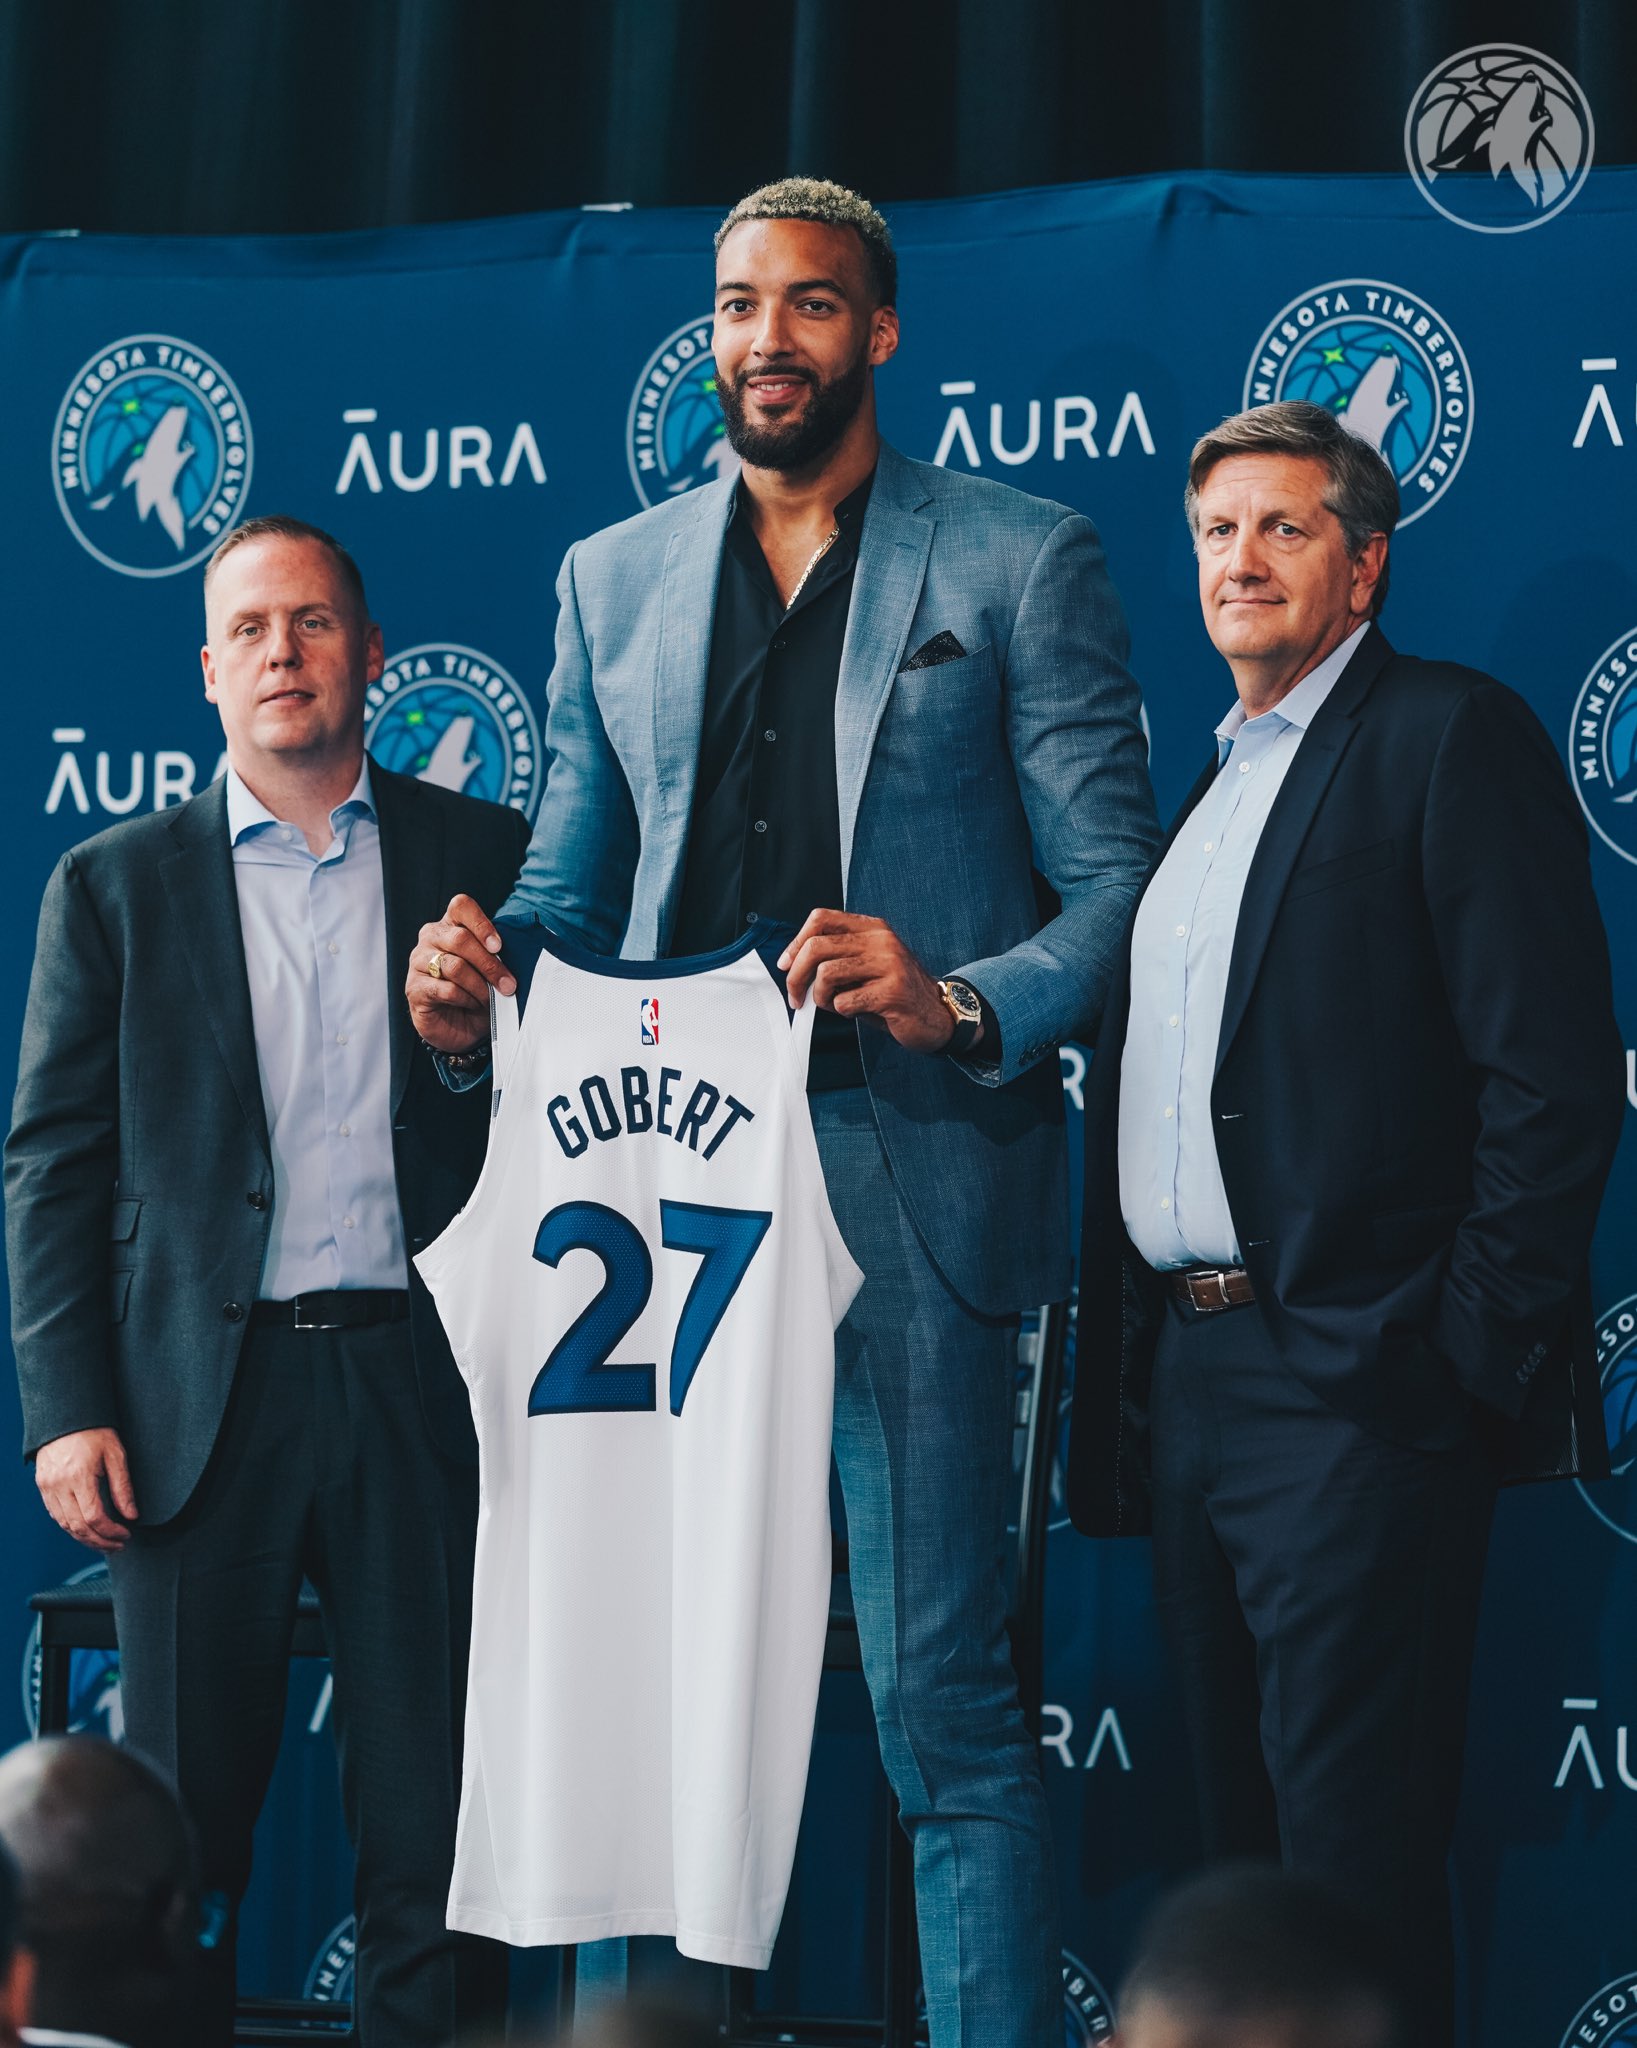 TImberwolves' Rudy Gobert introductory press conference